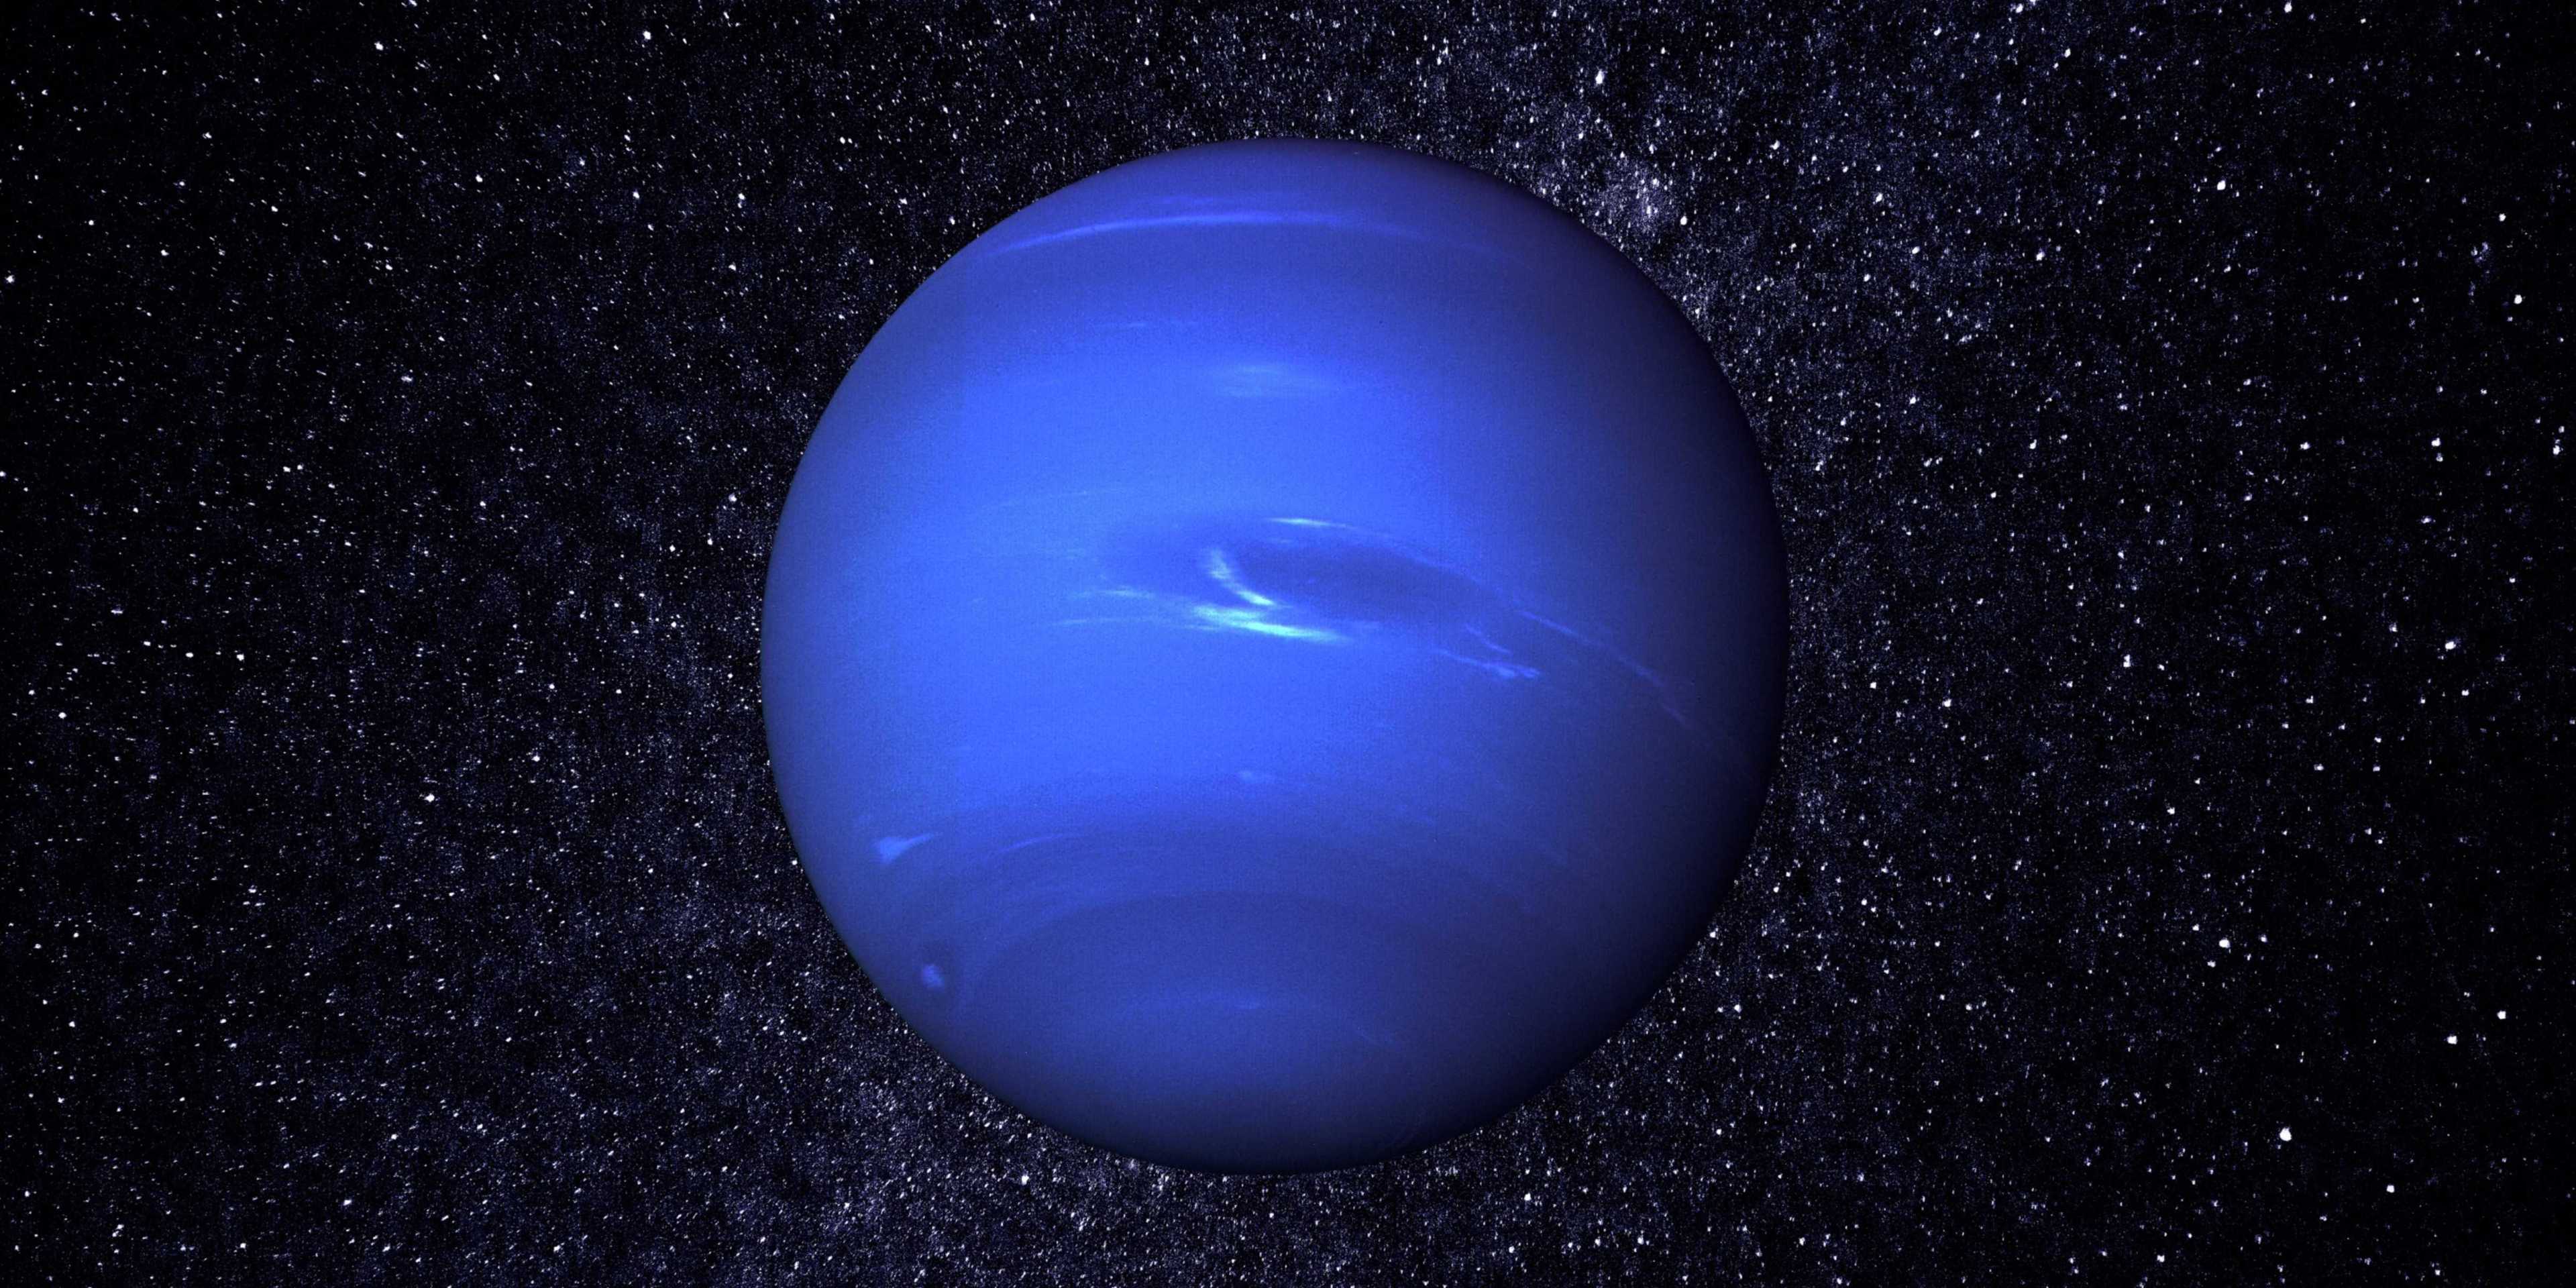 LOOK: NASA shares image of Neptune in 1989